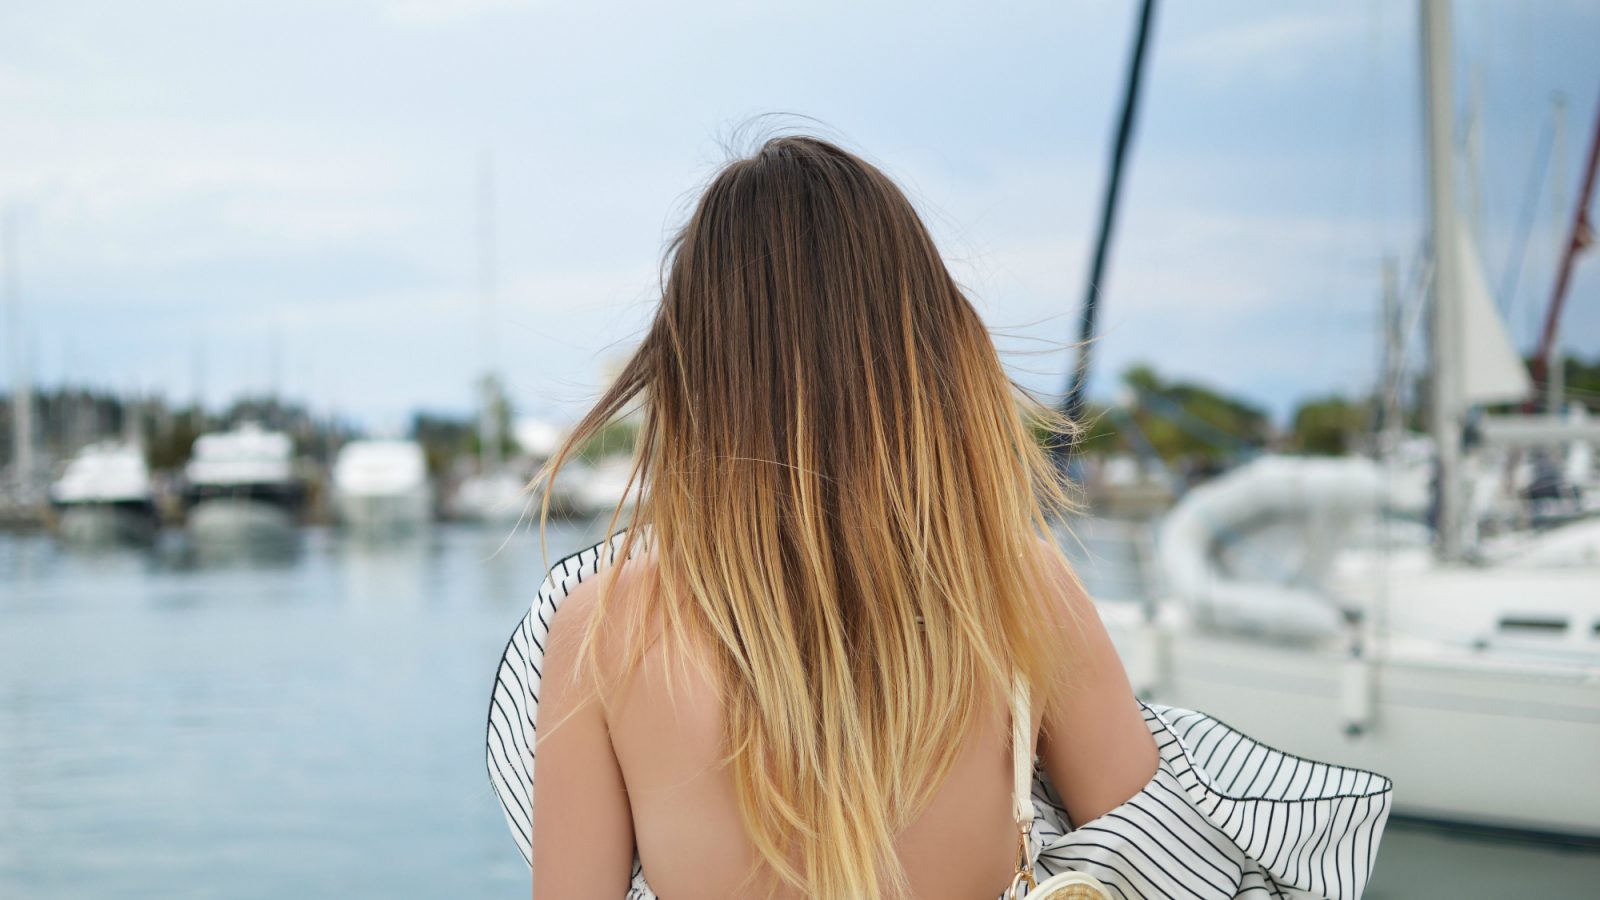 The Permanent Motion Sickness Cure That Changed My Life | The story of how I cured my motion sickness for good. #motionsickness #traveltips #seasick